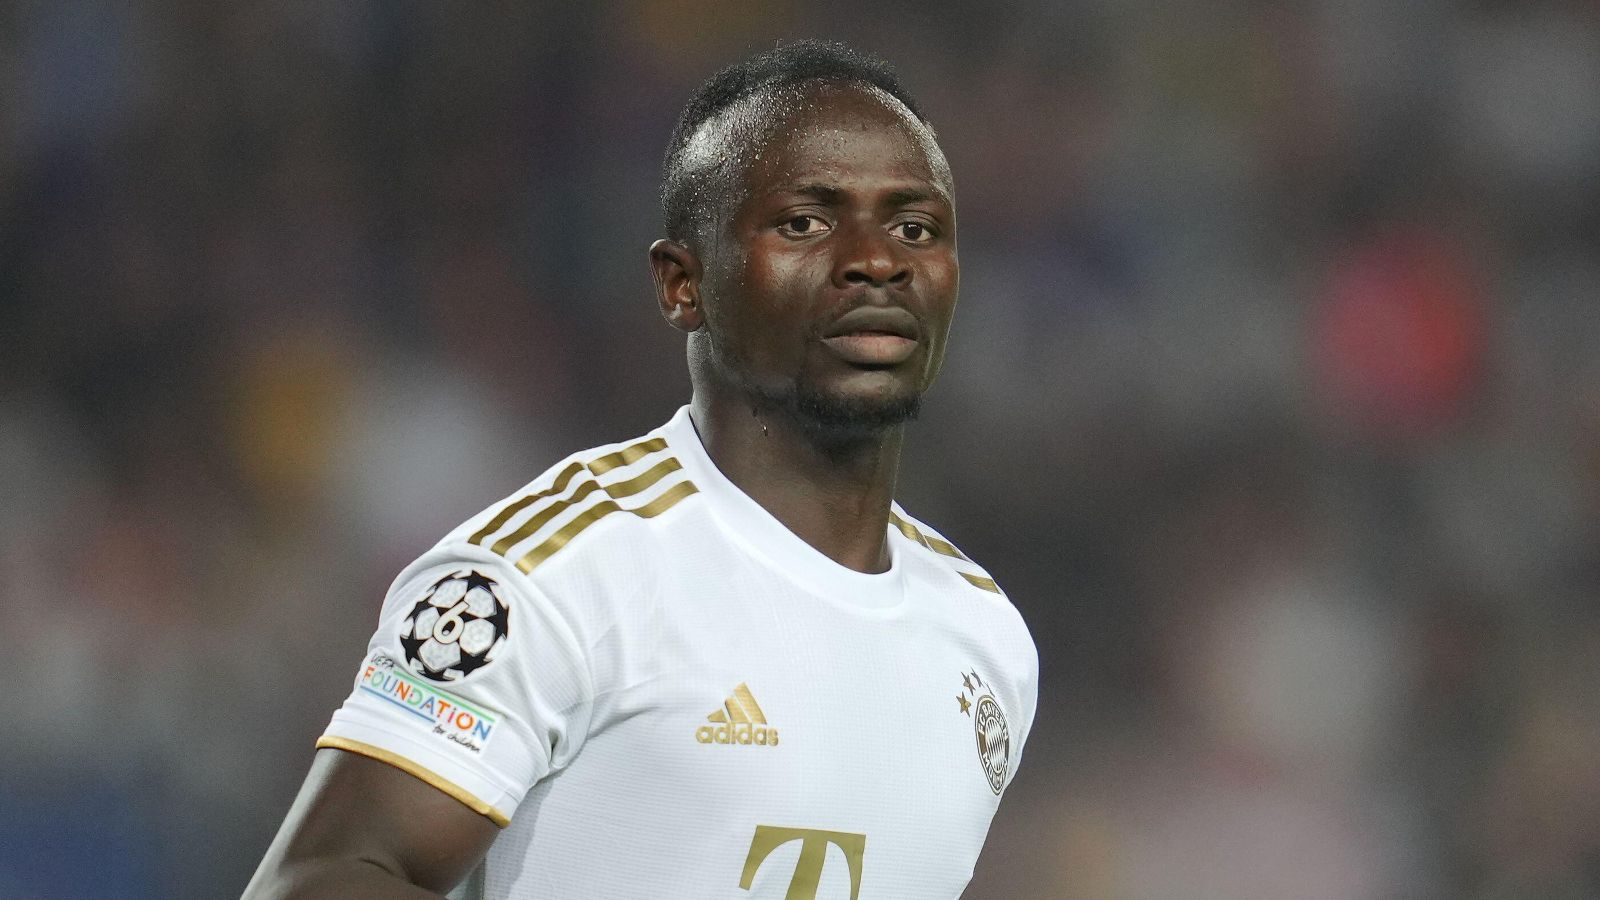 Liverpool news: Sadio Mane's 'private' admission revealed as he 'pines for his old club' after £35m exit